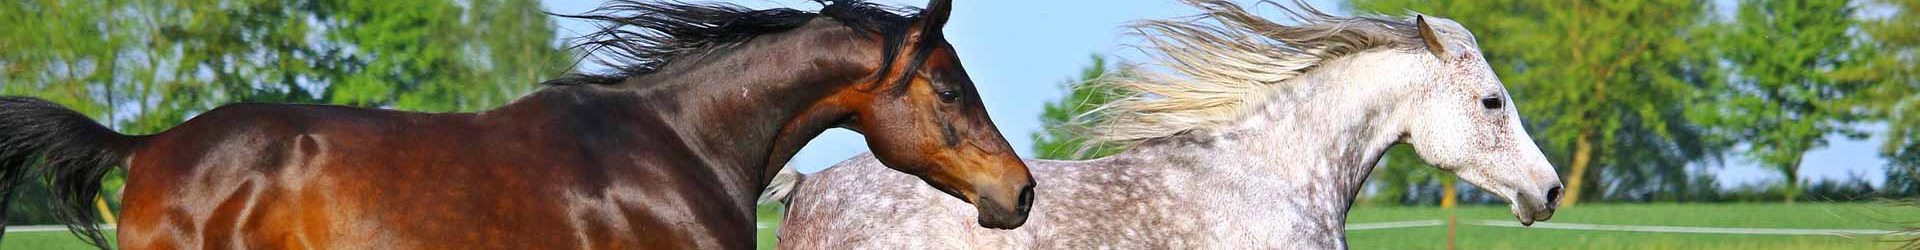 Tips on how to groom your horse